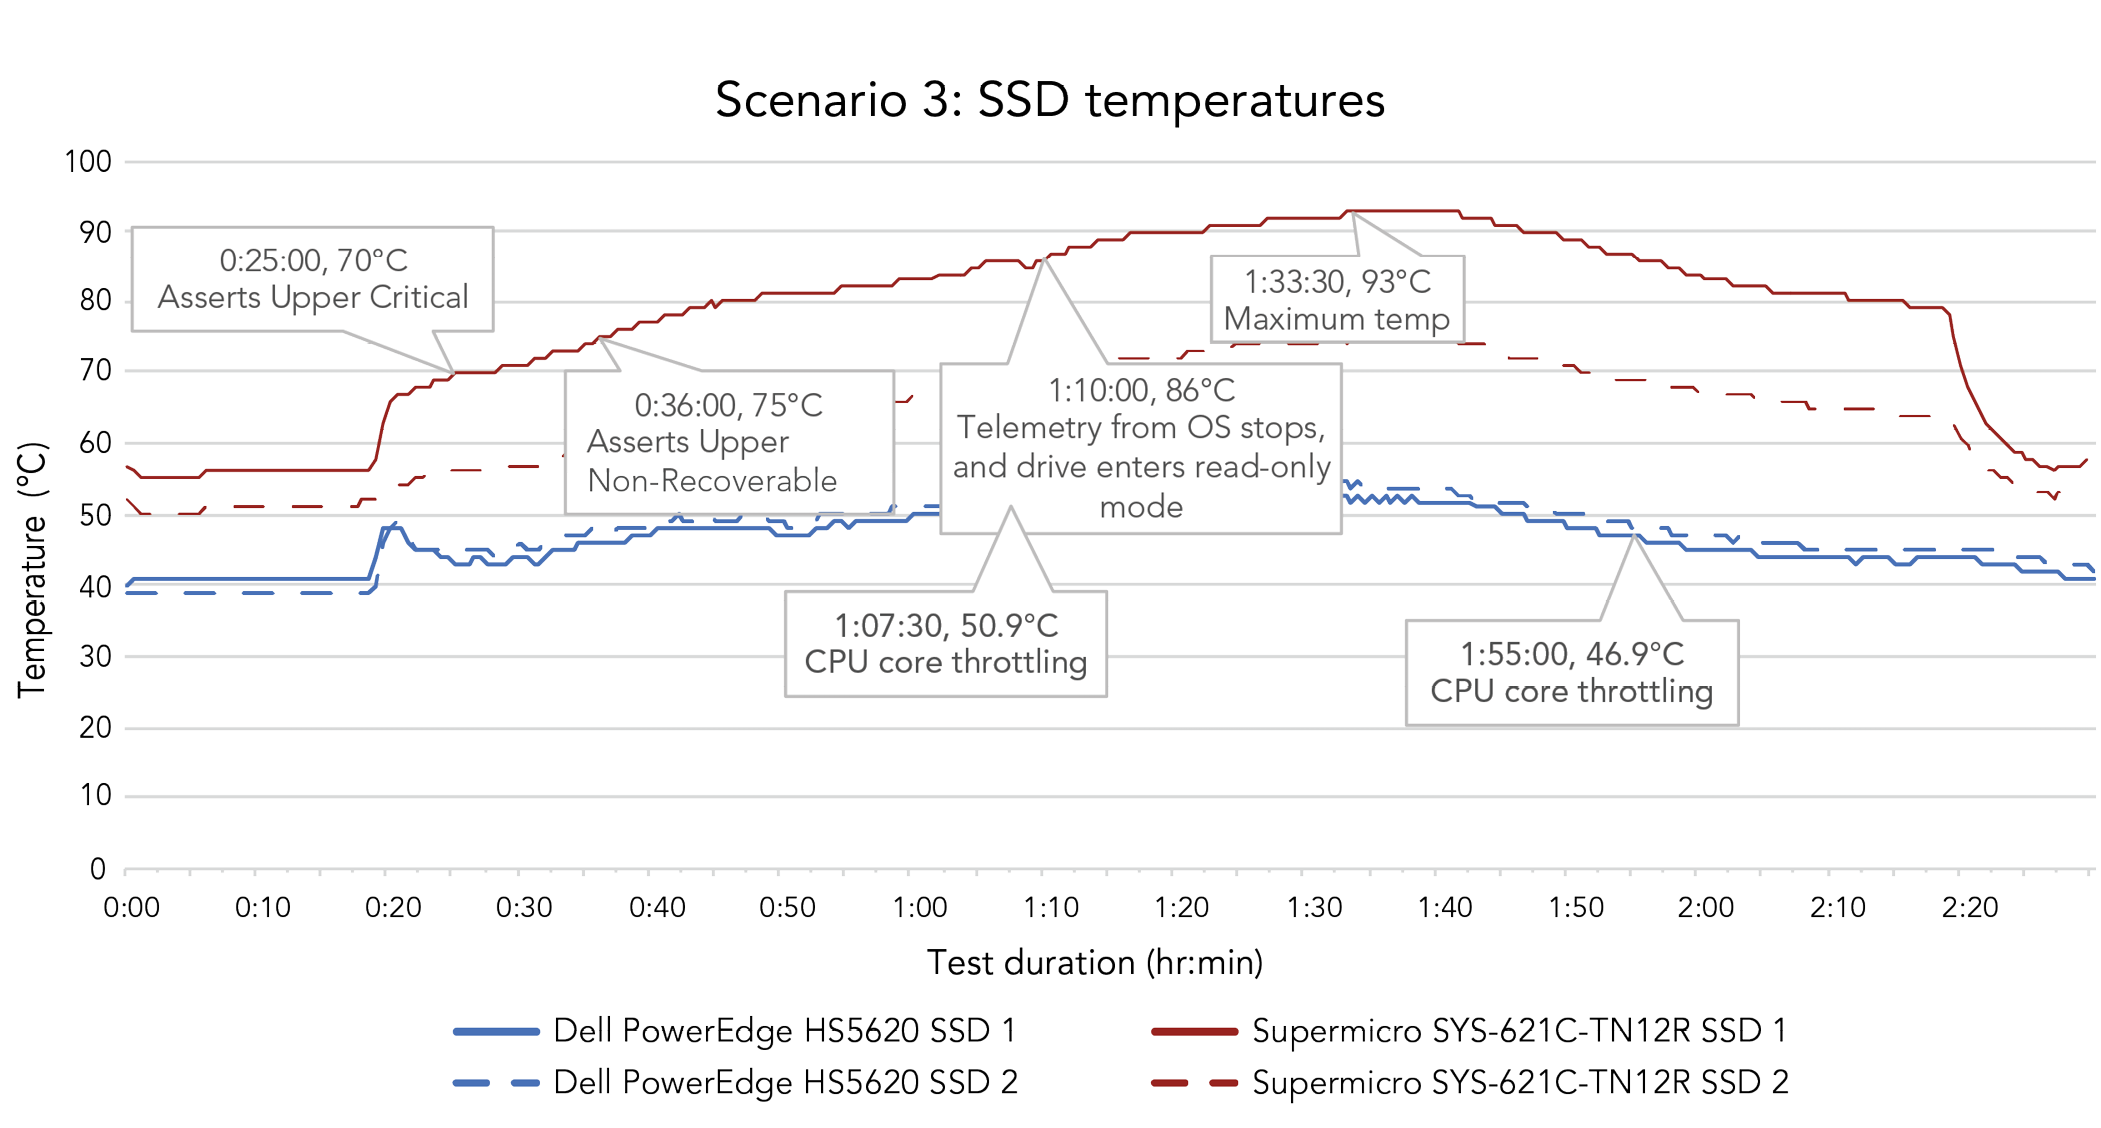 A line graph comparing each system’s SSD temperatures over the course of the two-and-a-half-hour scenario 3 test, which includes an idle period 15 minutes before the workload began, the two-hour workload, and 15 minutes after the workload completed. The Dell PowerEdge HS5620 server’s two SSDs remained around 40°C before the workload, stayed between about 45°C and 60°C over the course of the two-hour workload, and dropped to just over 40°C after completing the workload. We saw processor core throttling at 1 hour and 7 minutes into the test—when the SSD was 50.9°C—and at 1 hour and 55 minutes into the test—when the SSD was 46.9°C. The Supermicro SYS‑621C-TN12R server’s idle SSD was just over 50°C before the workload began, and steadily rose over the course of the two-hour workload, peaking around 75°C before dropping to just over 50°C when the workload completed. Its OS SSD started around 55°C, and temperatures peaked at 93°C 1 hour and 33 minutes into the test. At 25 minutes into the test, when the OS SSD reached 70°C, it reached an upper-critical threshold. Then, at 36 minutes into the test when the SSD reached 75°C, we received a warning that the OS SSD had reached an upper non-recoverable threshold. 1 hour and 10 minutes into the test, when the OS SSD measured 86°C, telemetry stopped, and the drive entered read-only mode. After the workload competed, OS SSD temperatures dropped to just under 60°C.